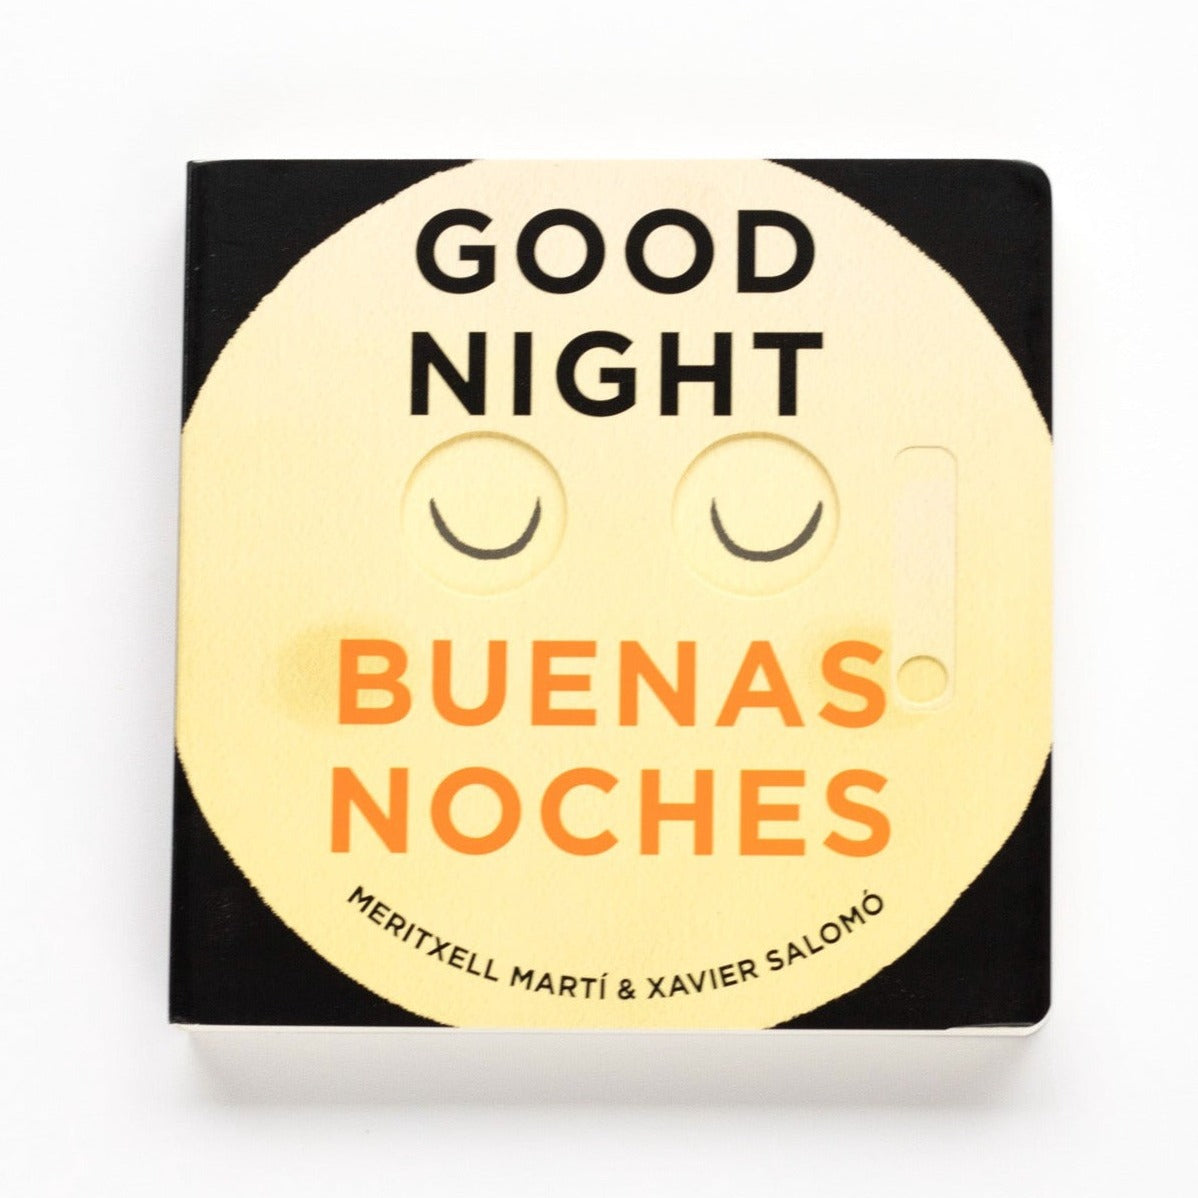 A black board book with yellow moon with closed eyes on front. Text on book reads, "Good Night Buenas Noches Meritxell Marti & Xavier Salomo". Photographed on white background.